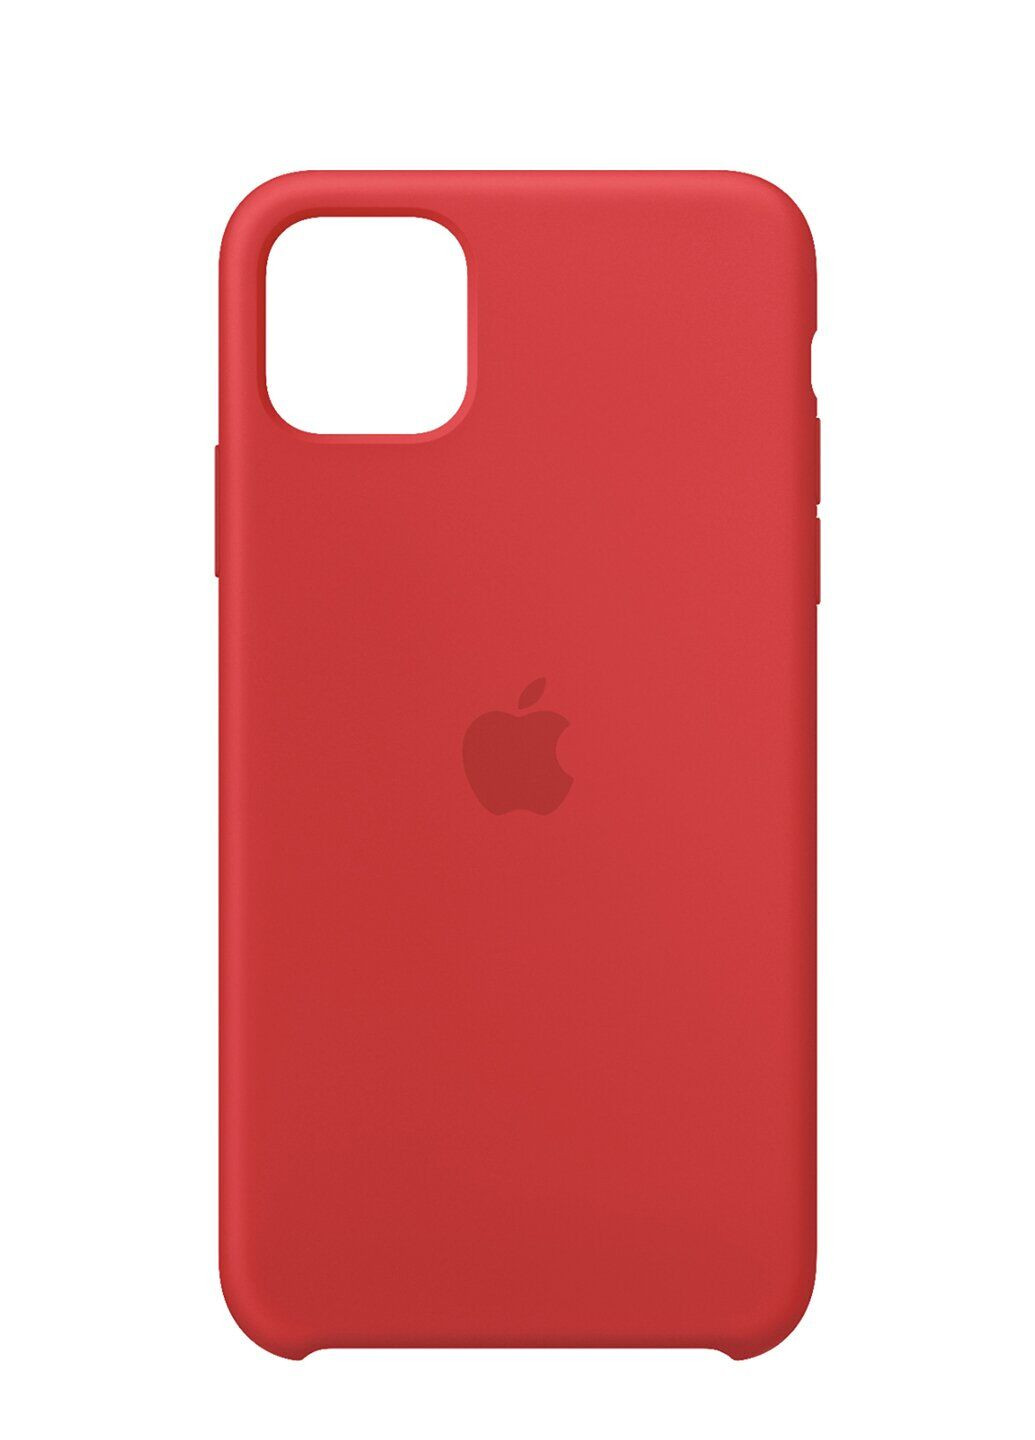 Чехол iPhone 11 product red ARM silicone case (210251166)